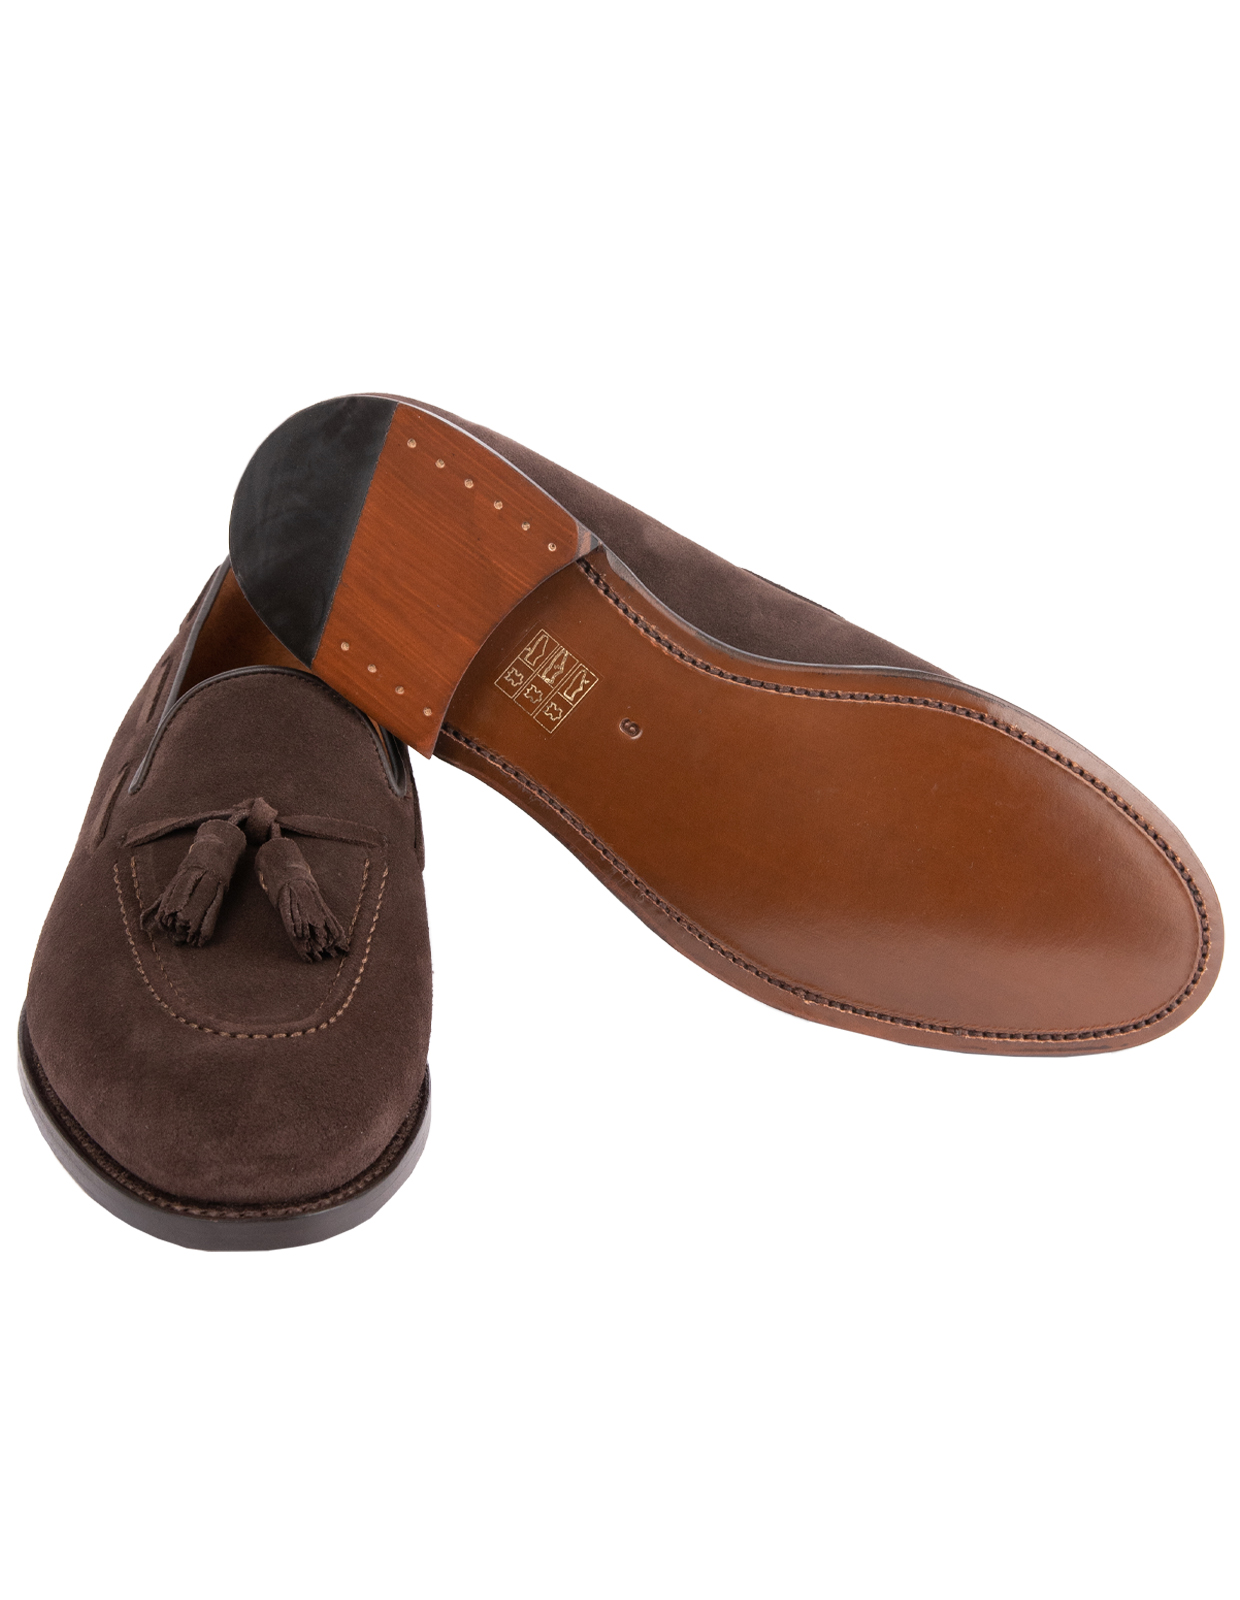 Tassel Loafers Suede Bitter Chocolate Stl 6